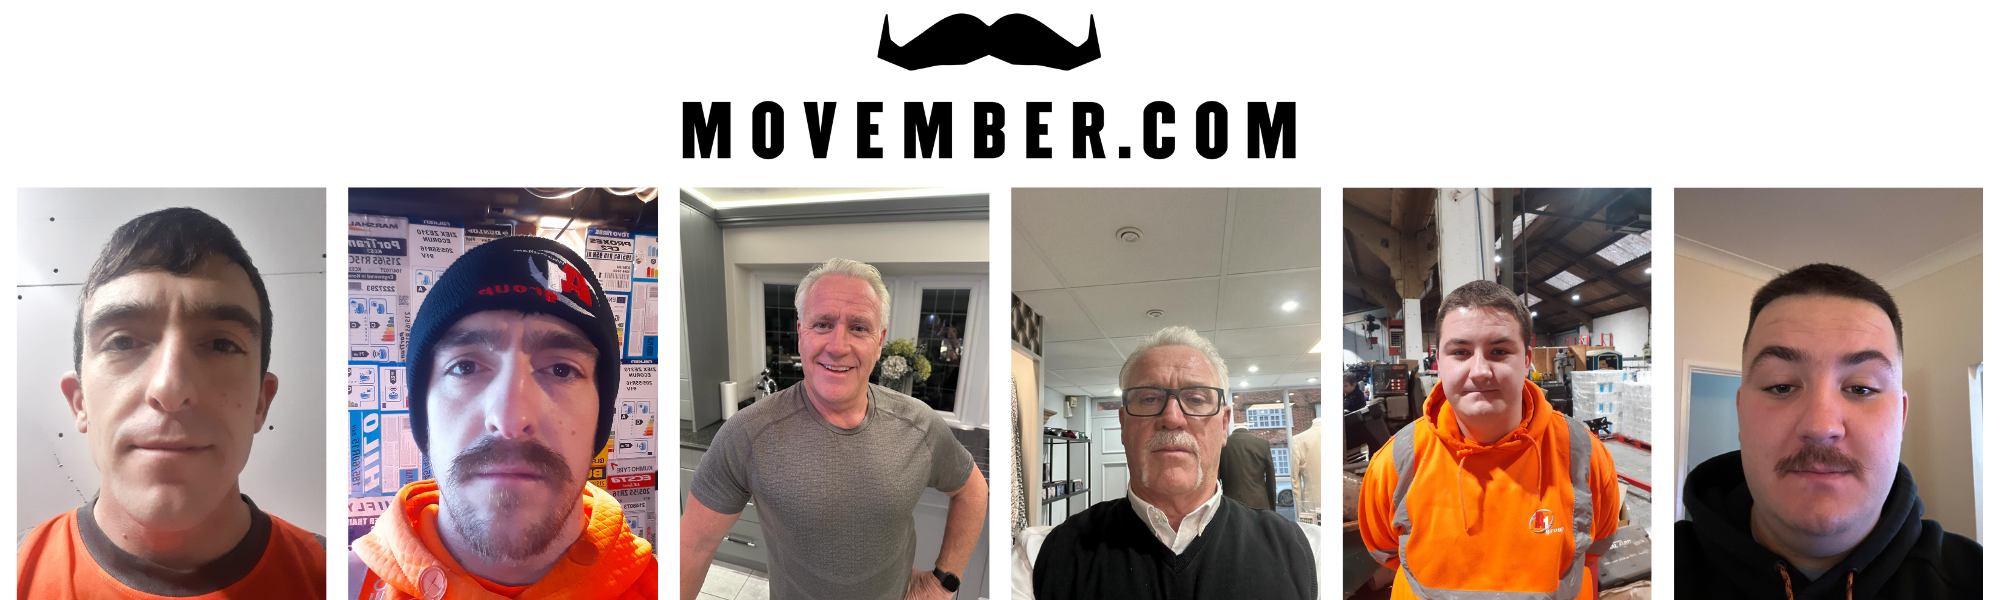 Movember_News_Article_Banner__1.png